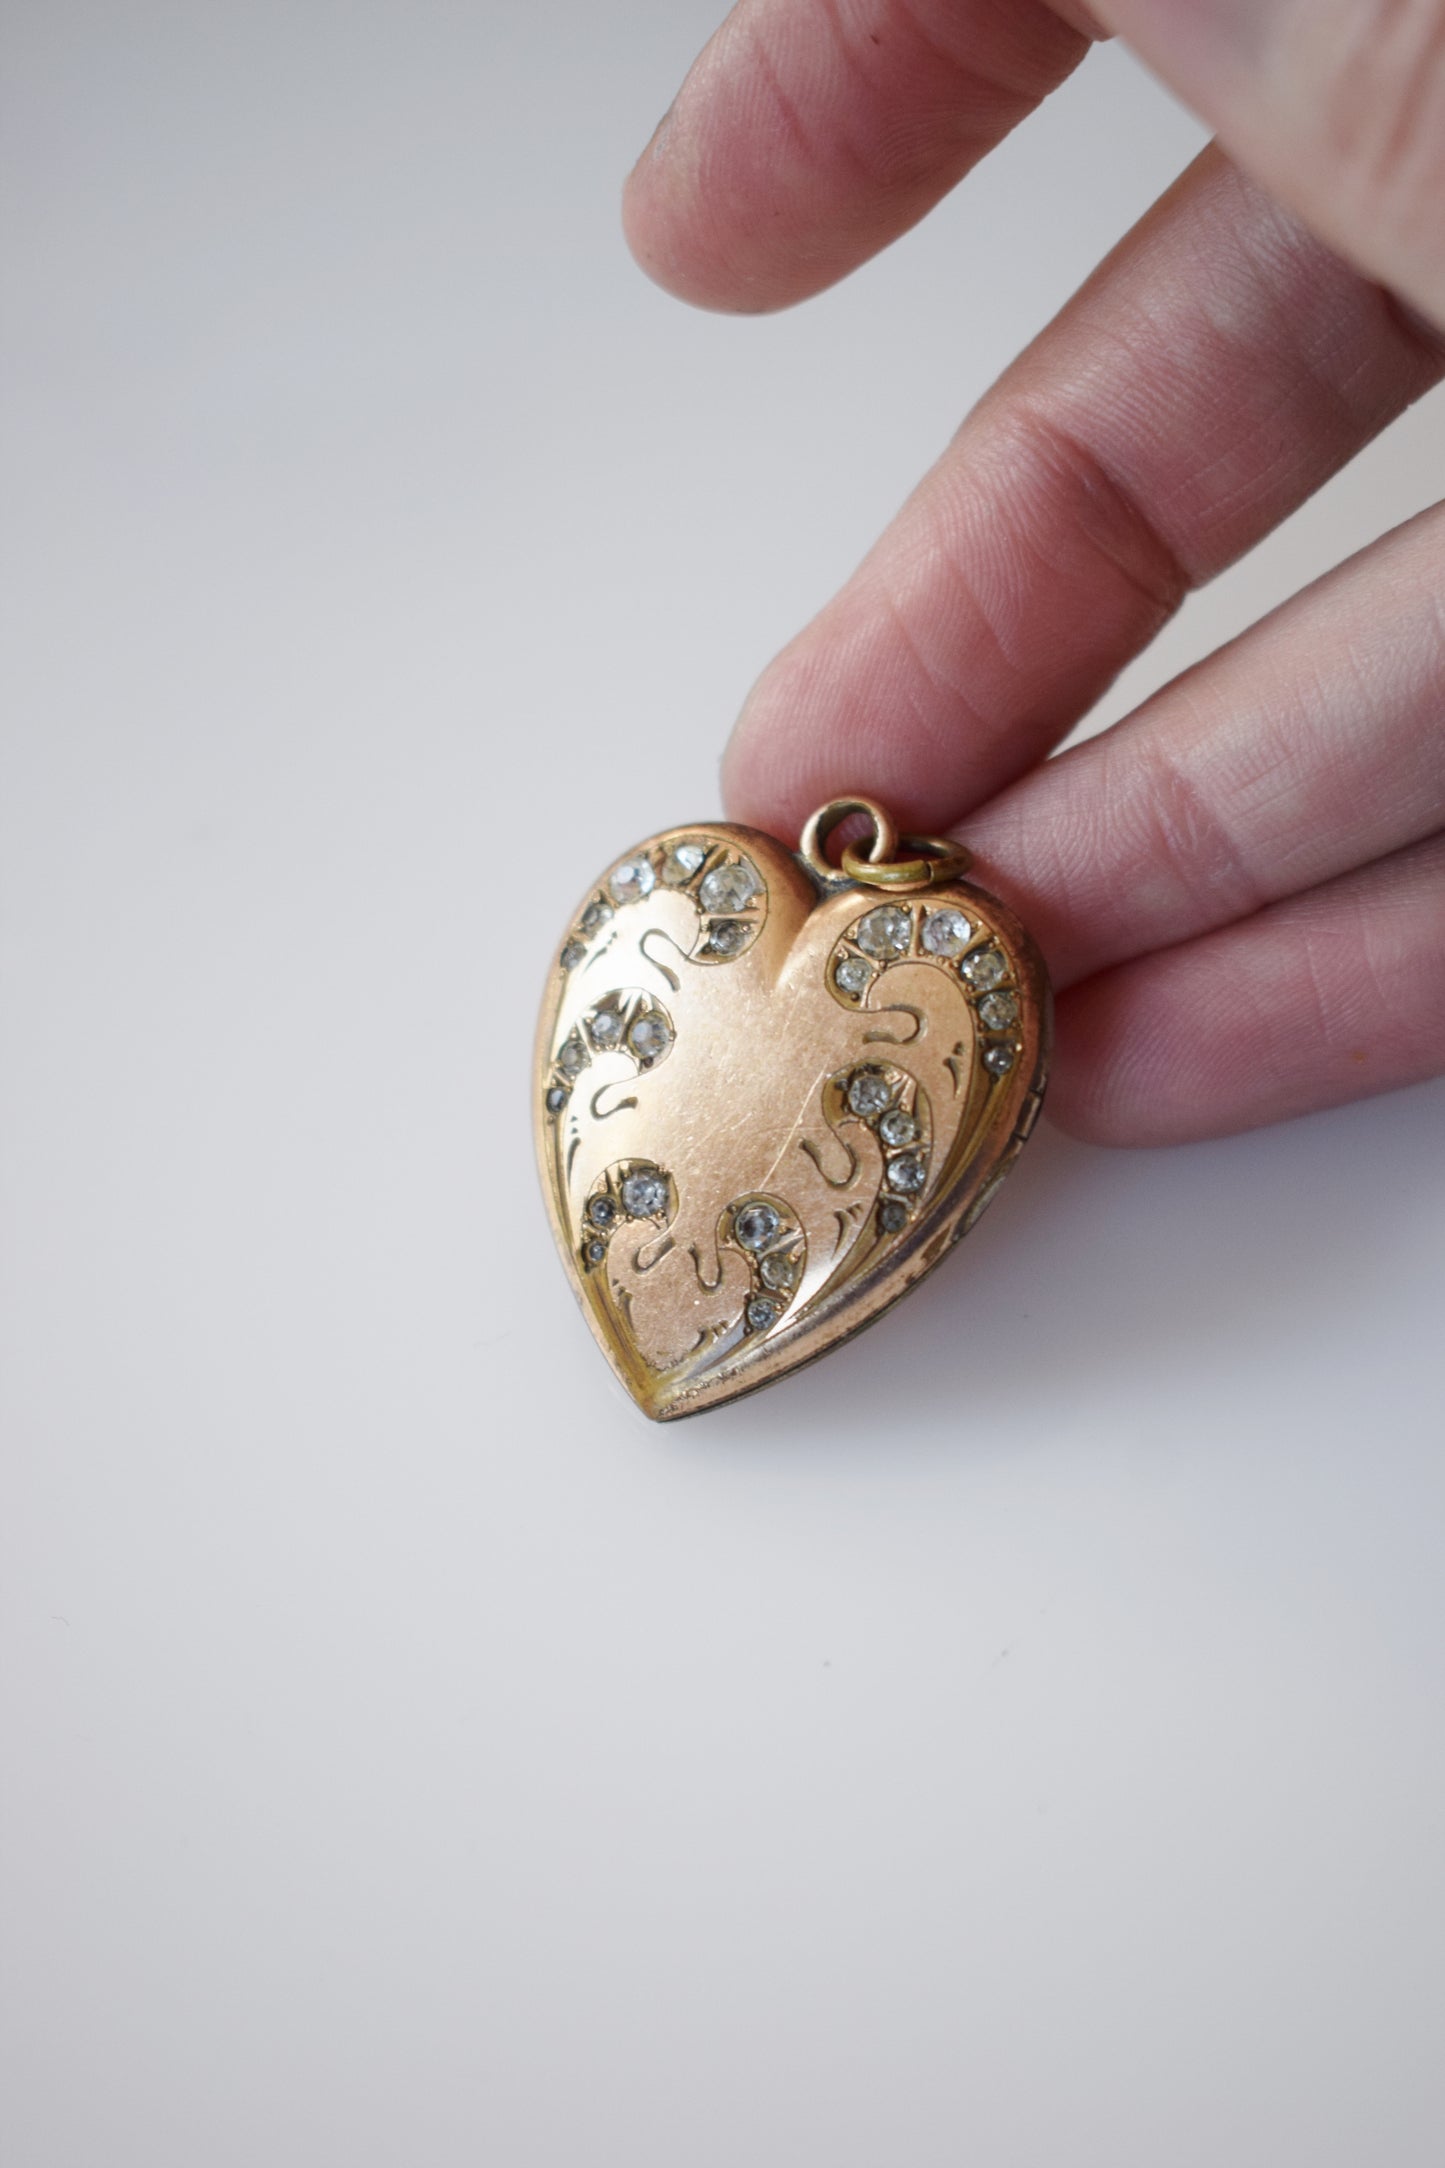 Antique Gold Heart Shaped Locket with Rhinestones